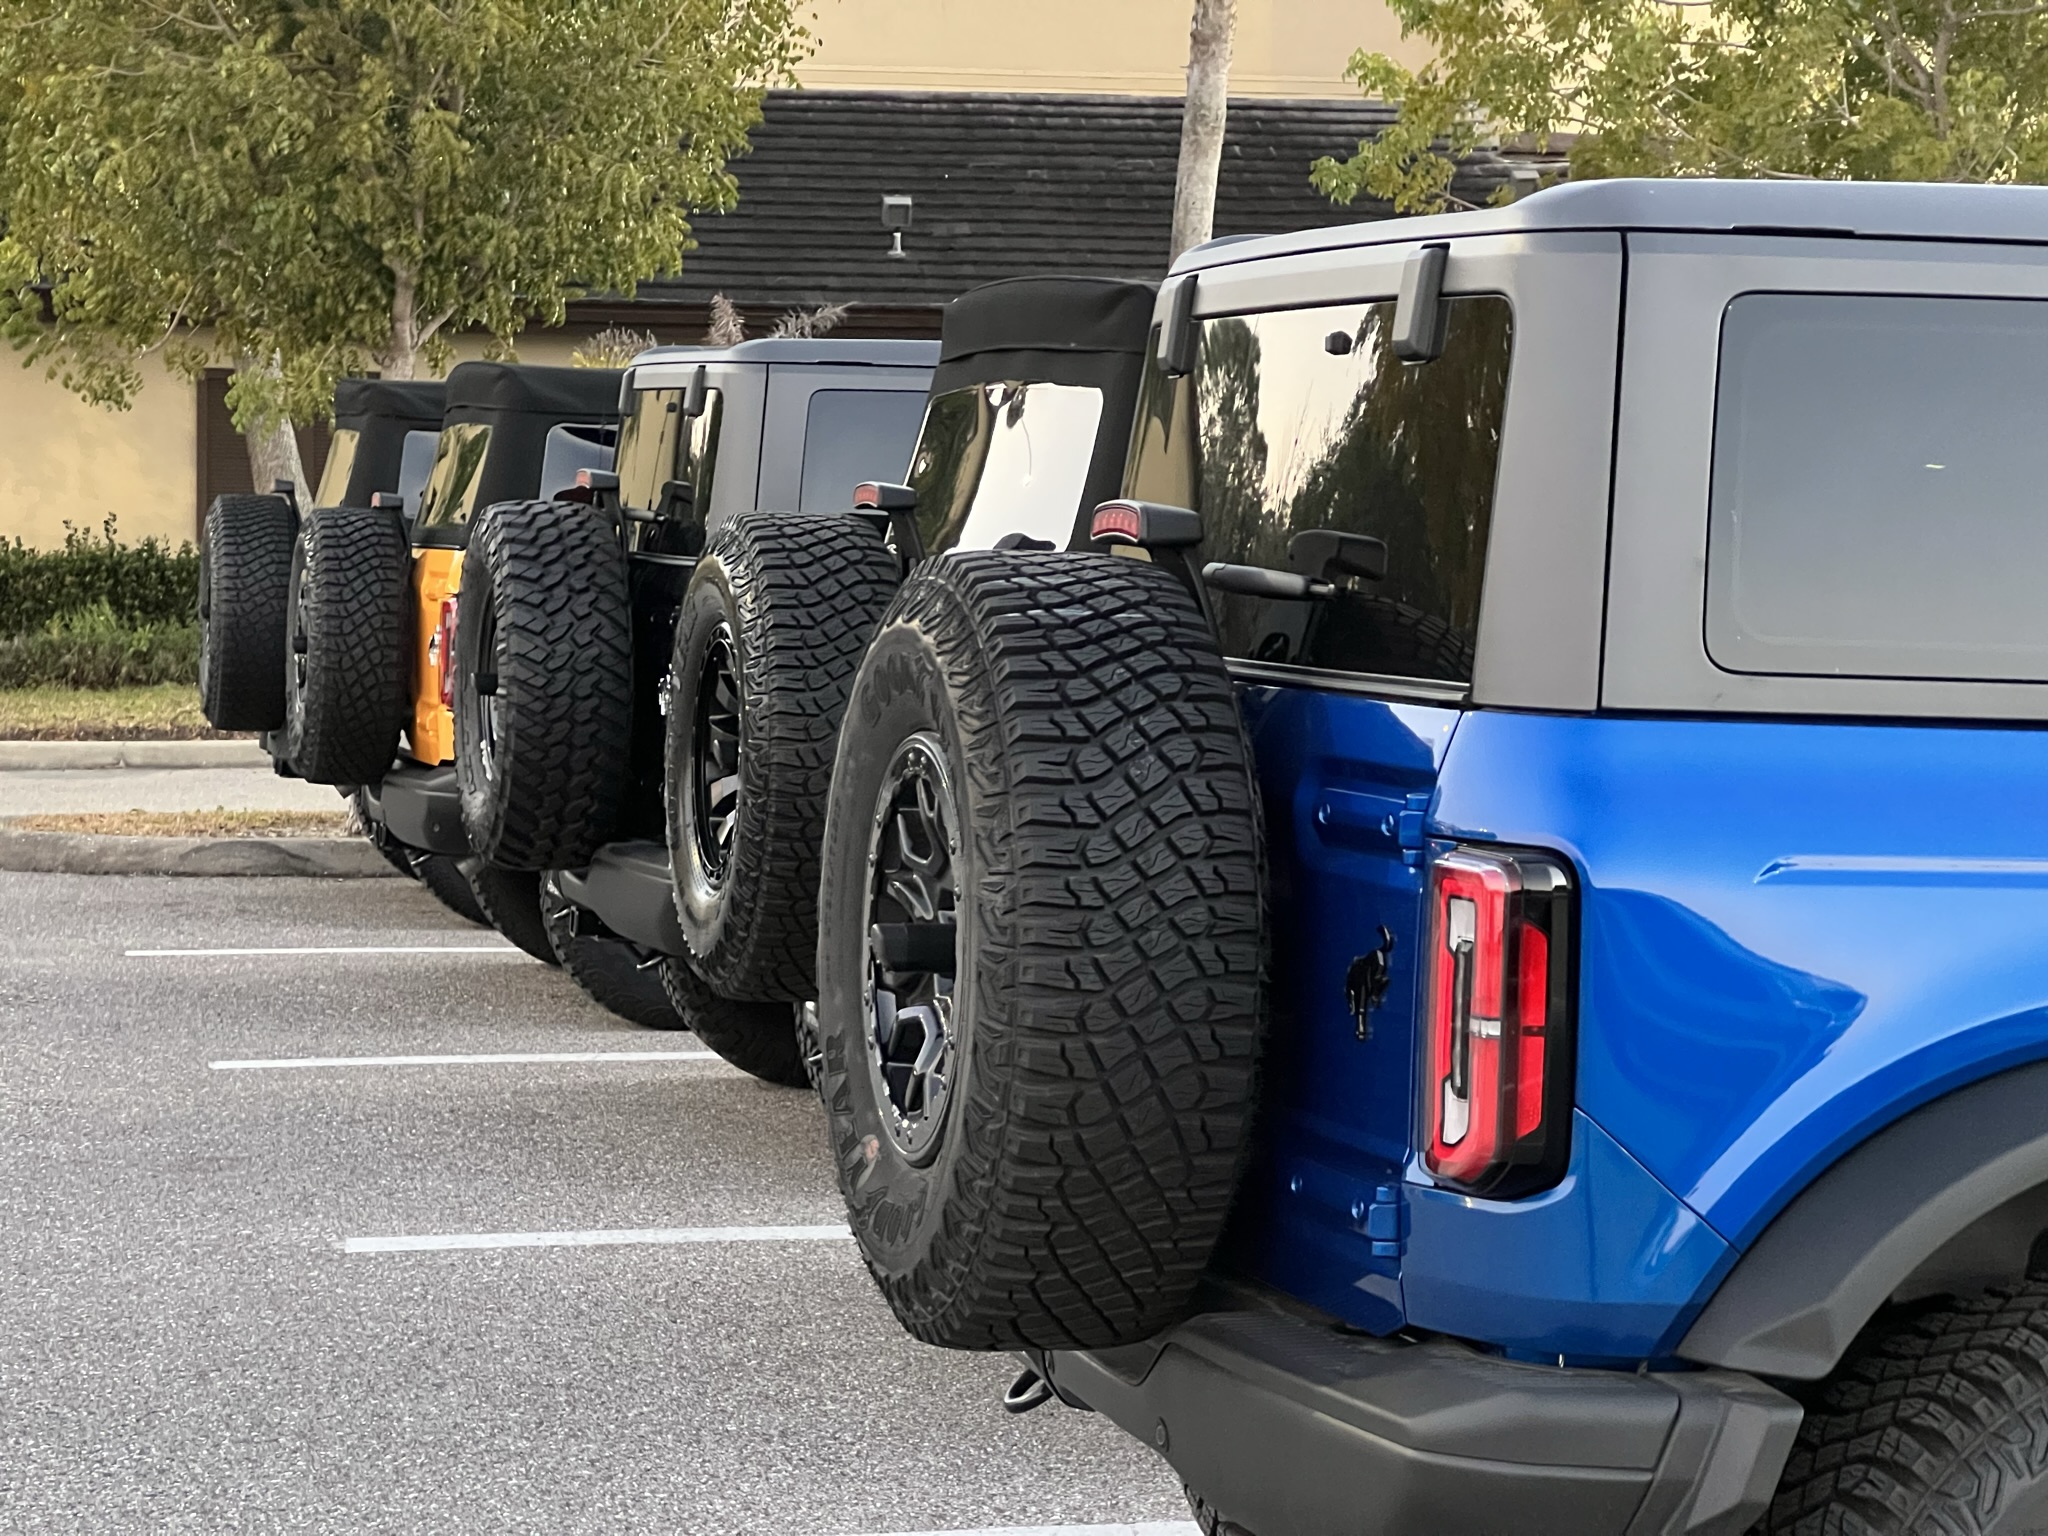 Ford Bronco Soft Top <--> Hard Top Swap : Tips & Lessons Learned - UPDATED 5F7BD299-AAD4-4BF3-8FA6-D7EA73CBB17C_1_102_o